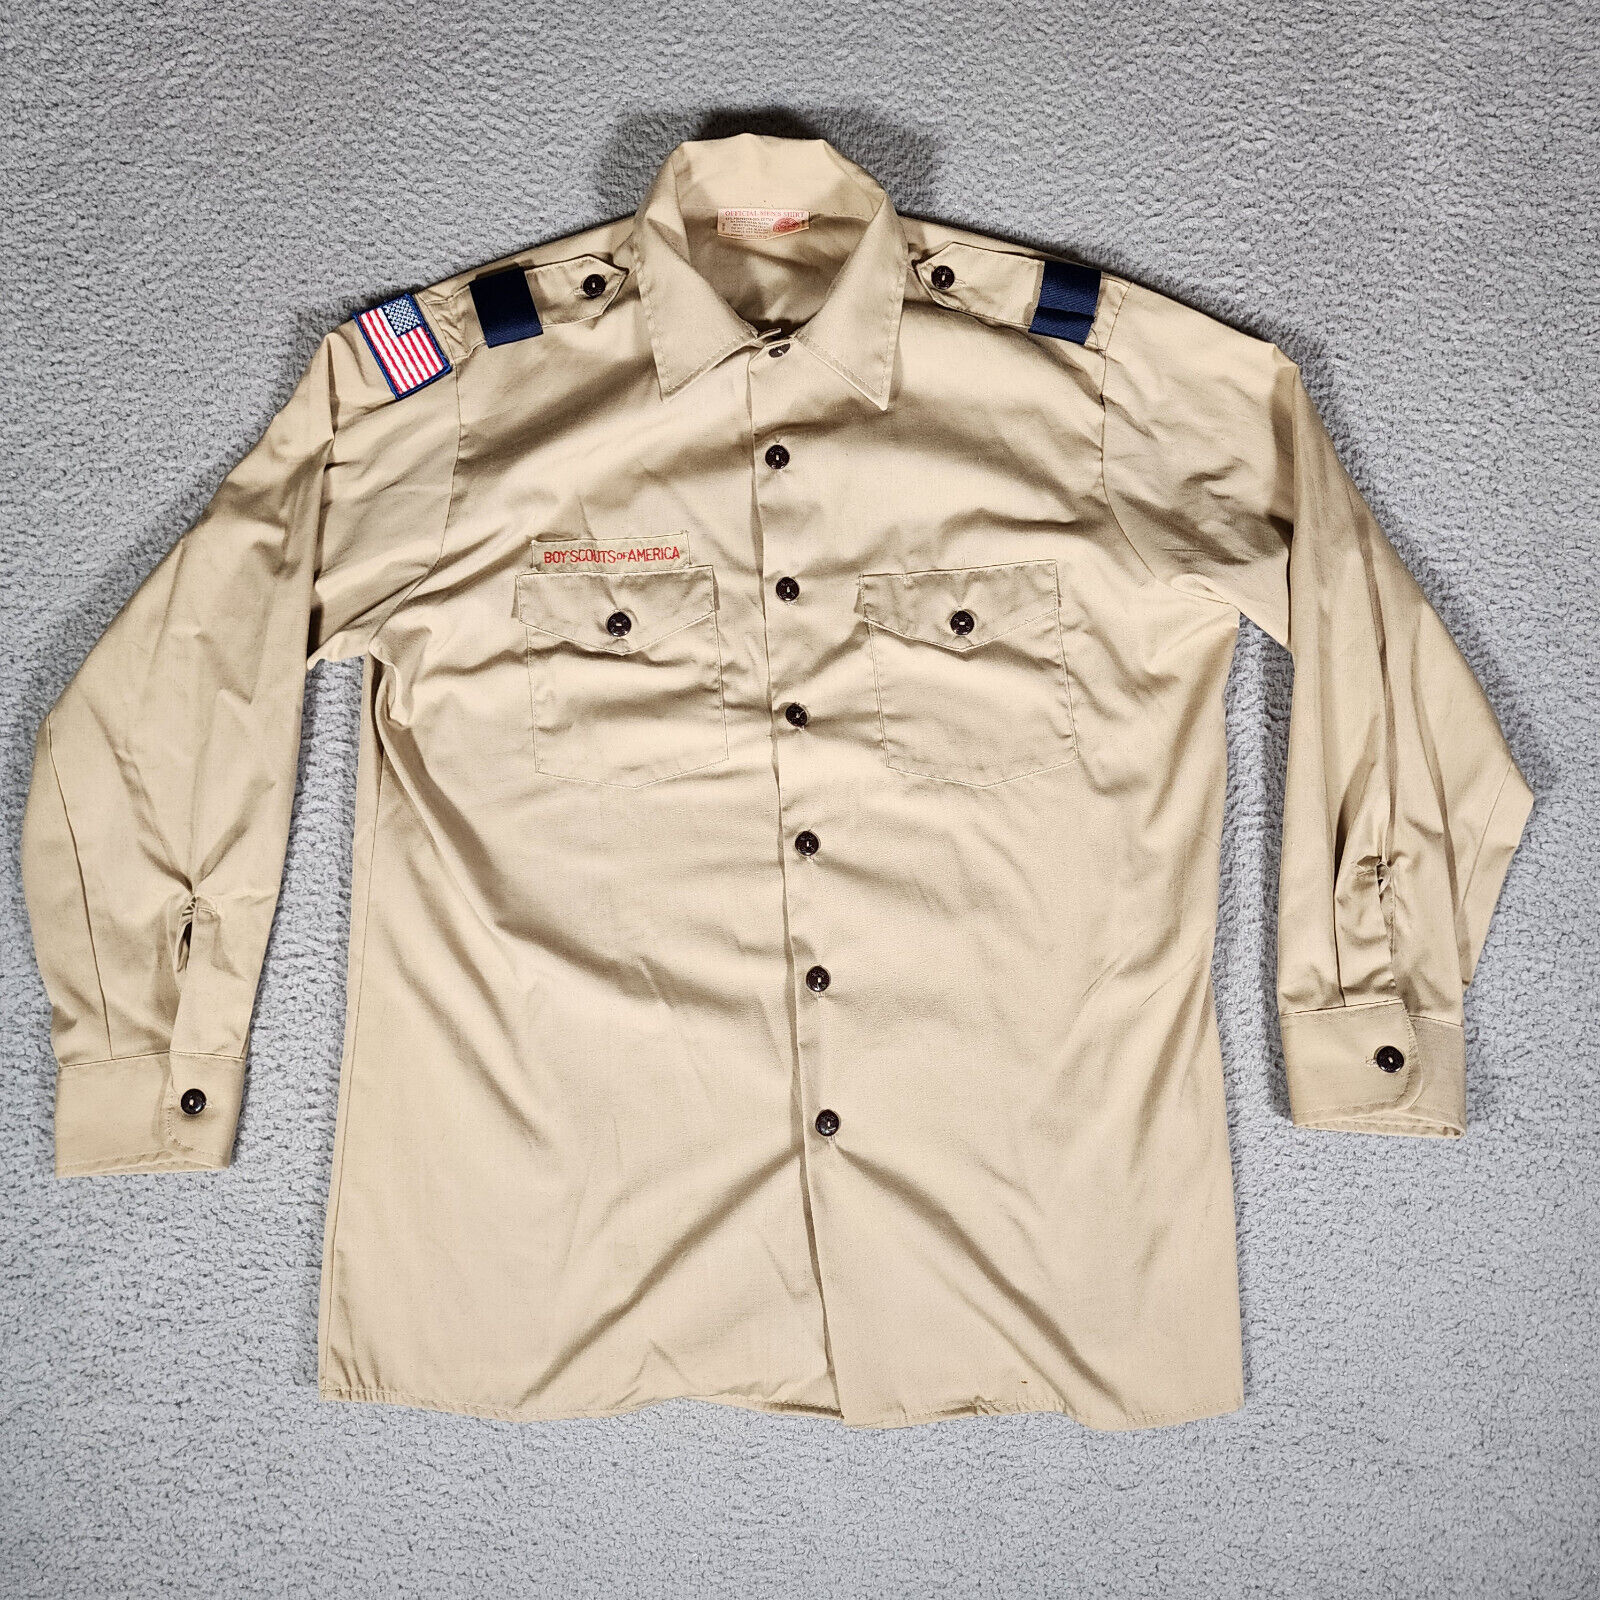 Boy Scout Uniform Shirt Adult Large Long Sleeve Button Up Made in USA BSA Patch